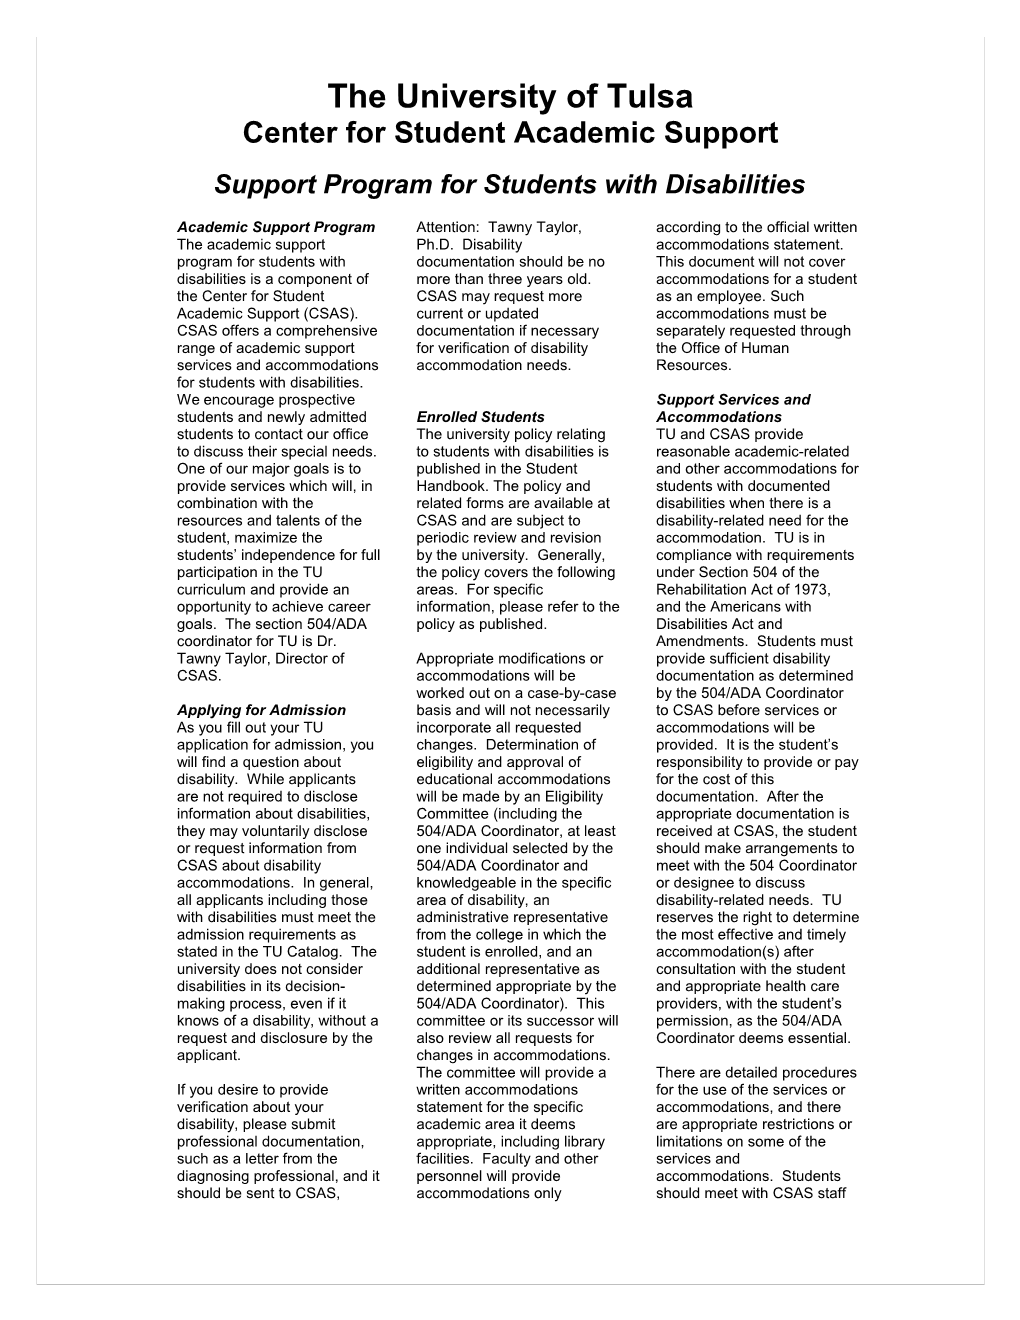 Support Program for Students with Disabilities